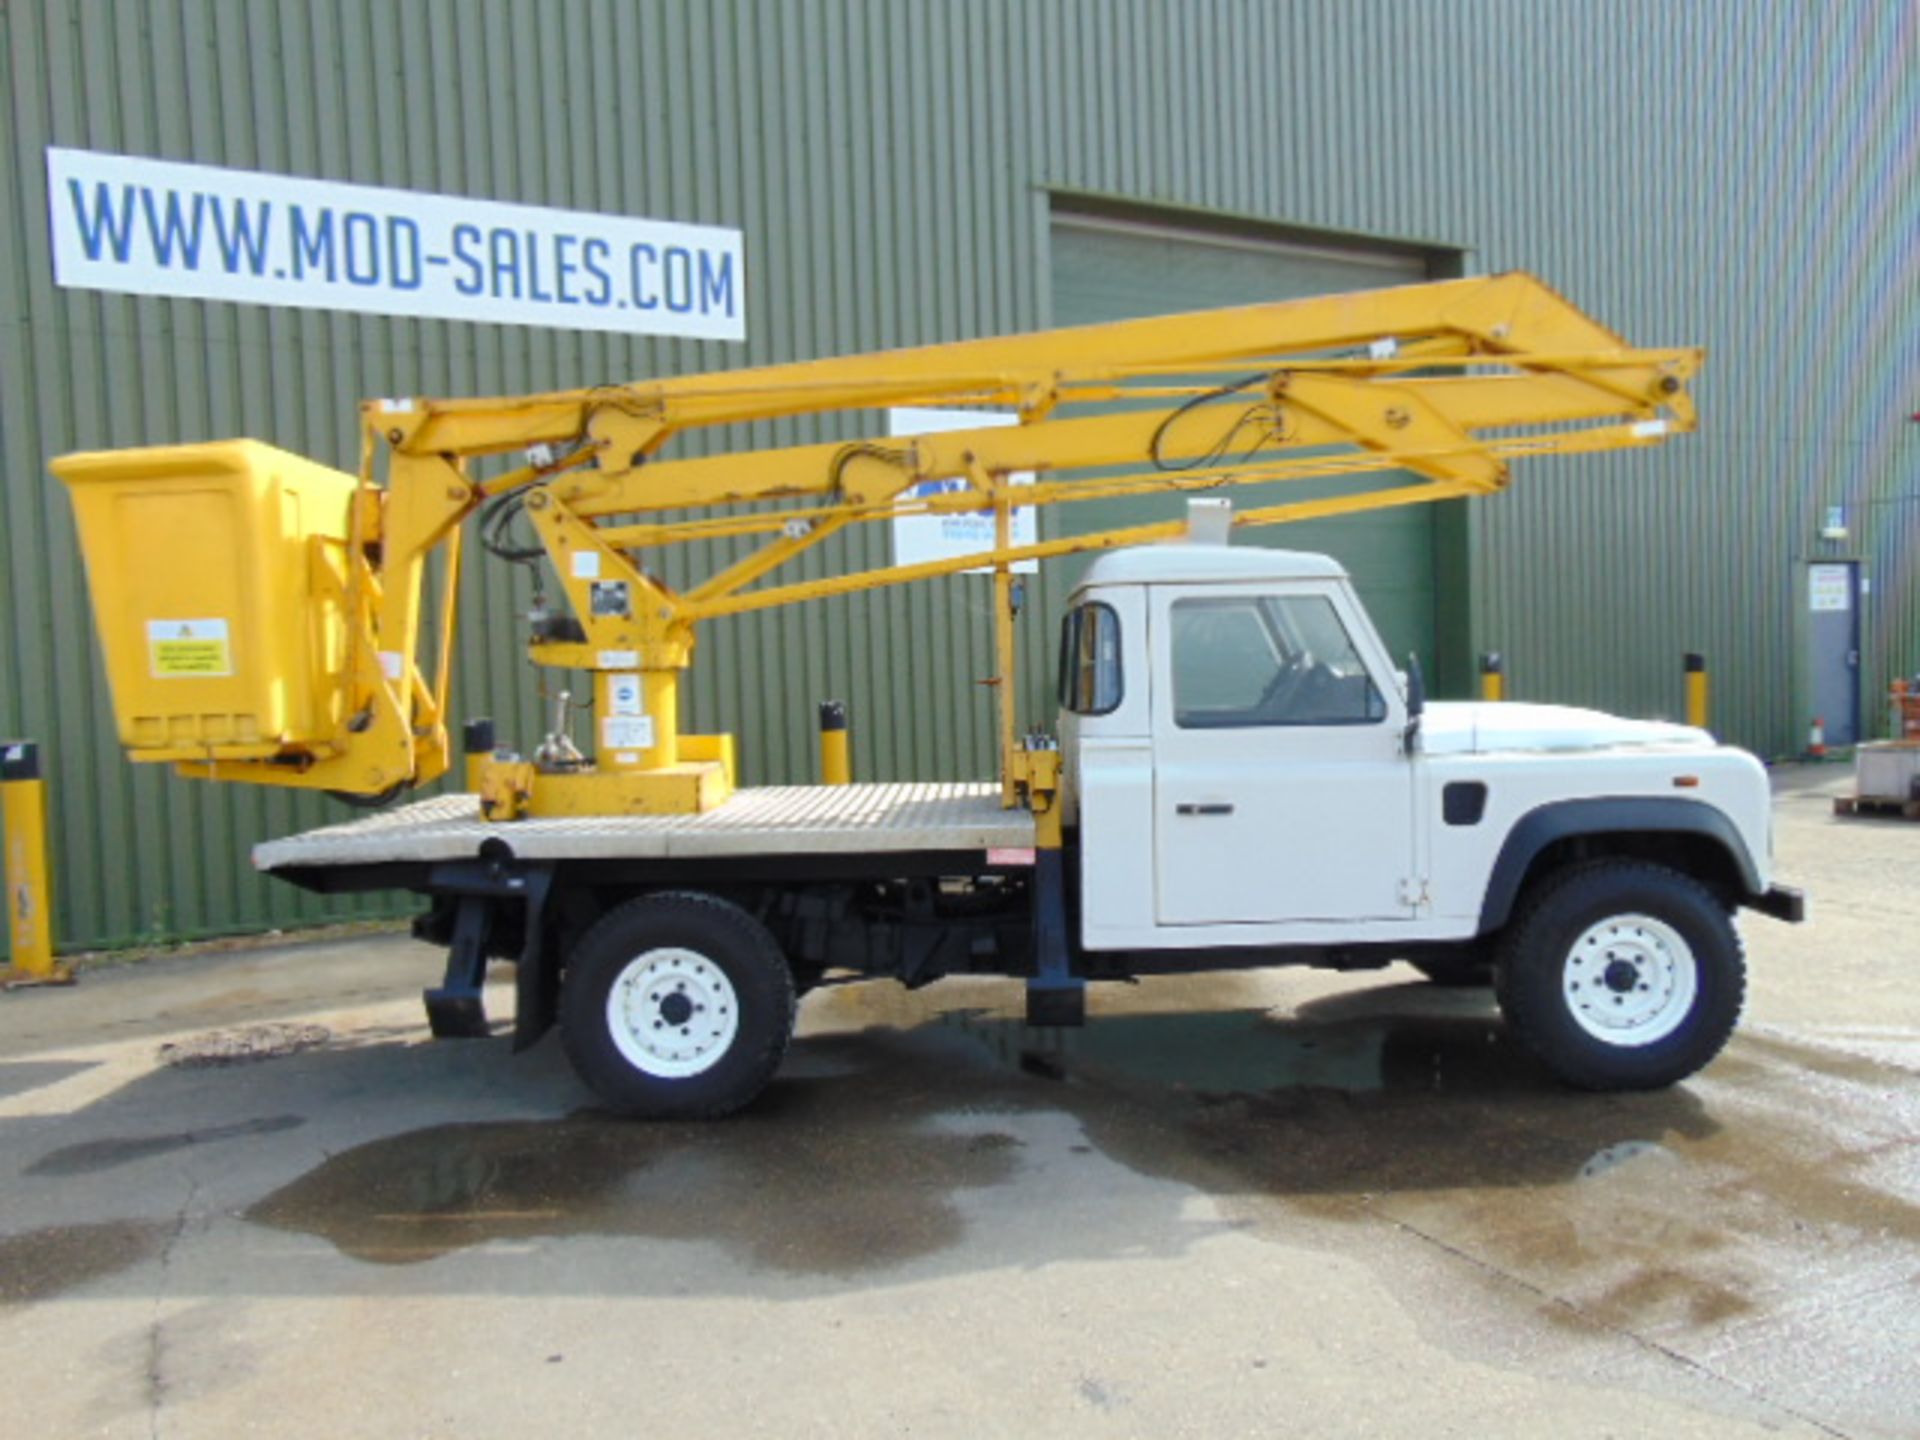 2010 Land Rover Defender 130 2.4 Puma Cherry Picker / Access Lift ONLY 83,760 MILES! - Image 8 of 32